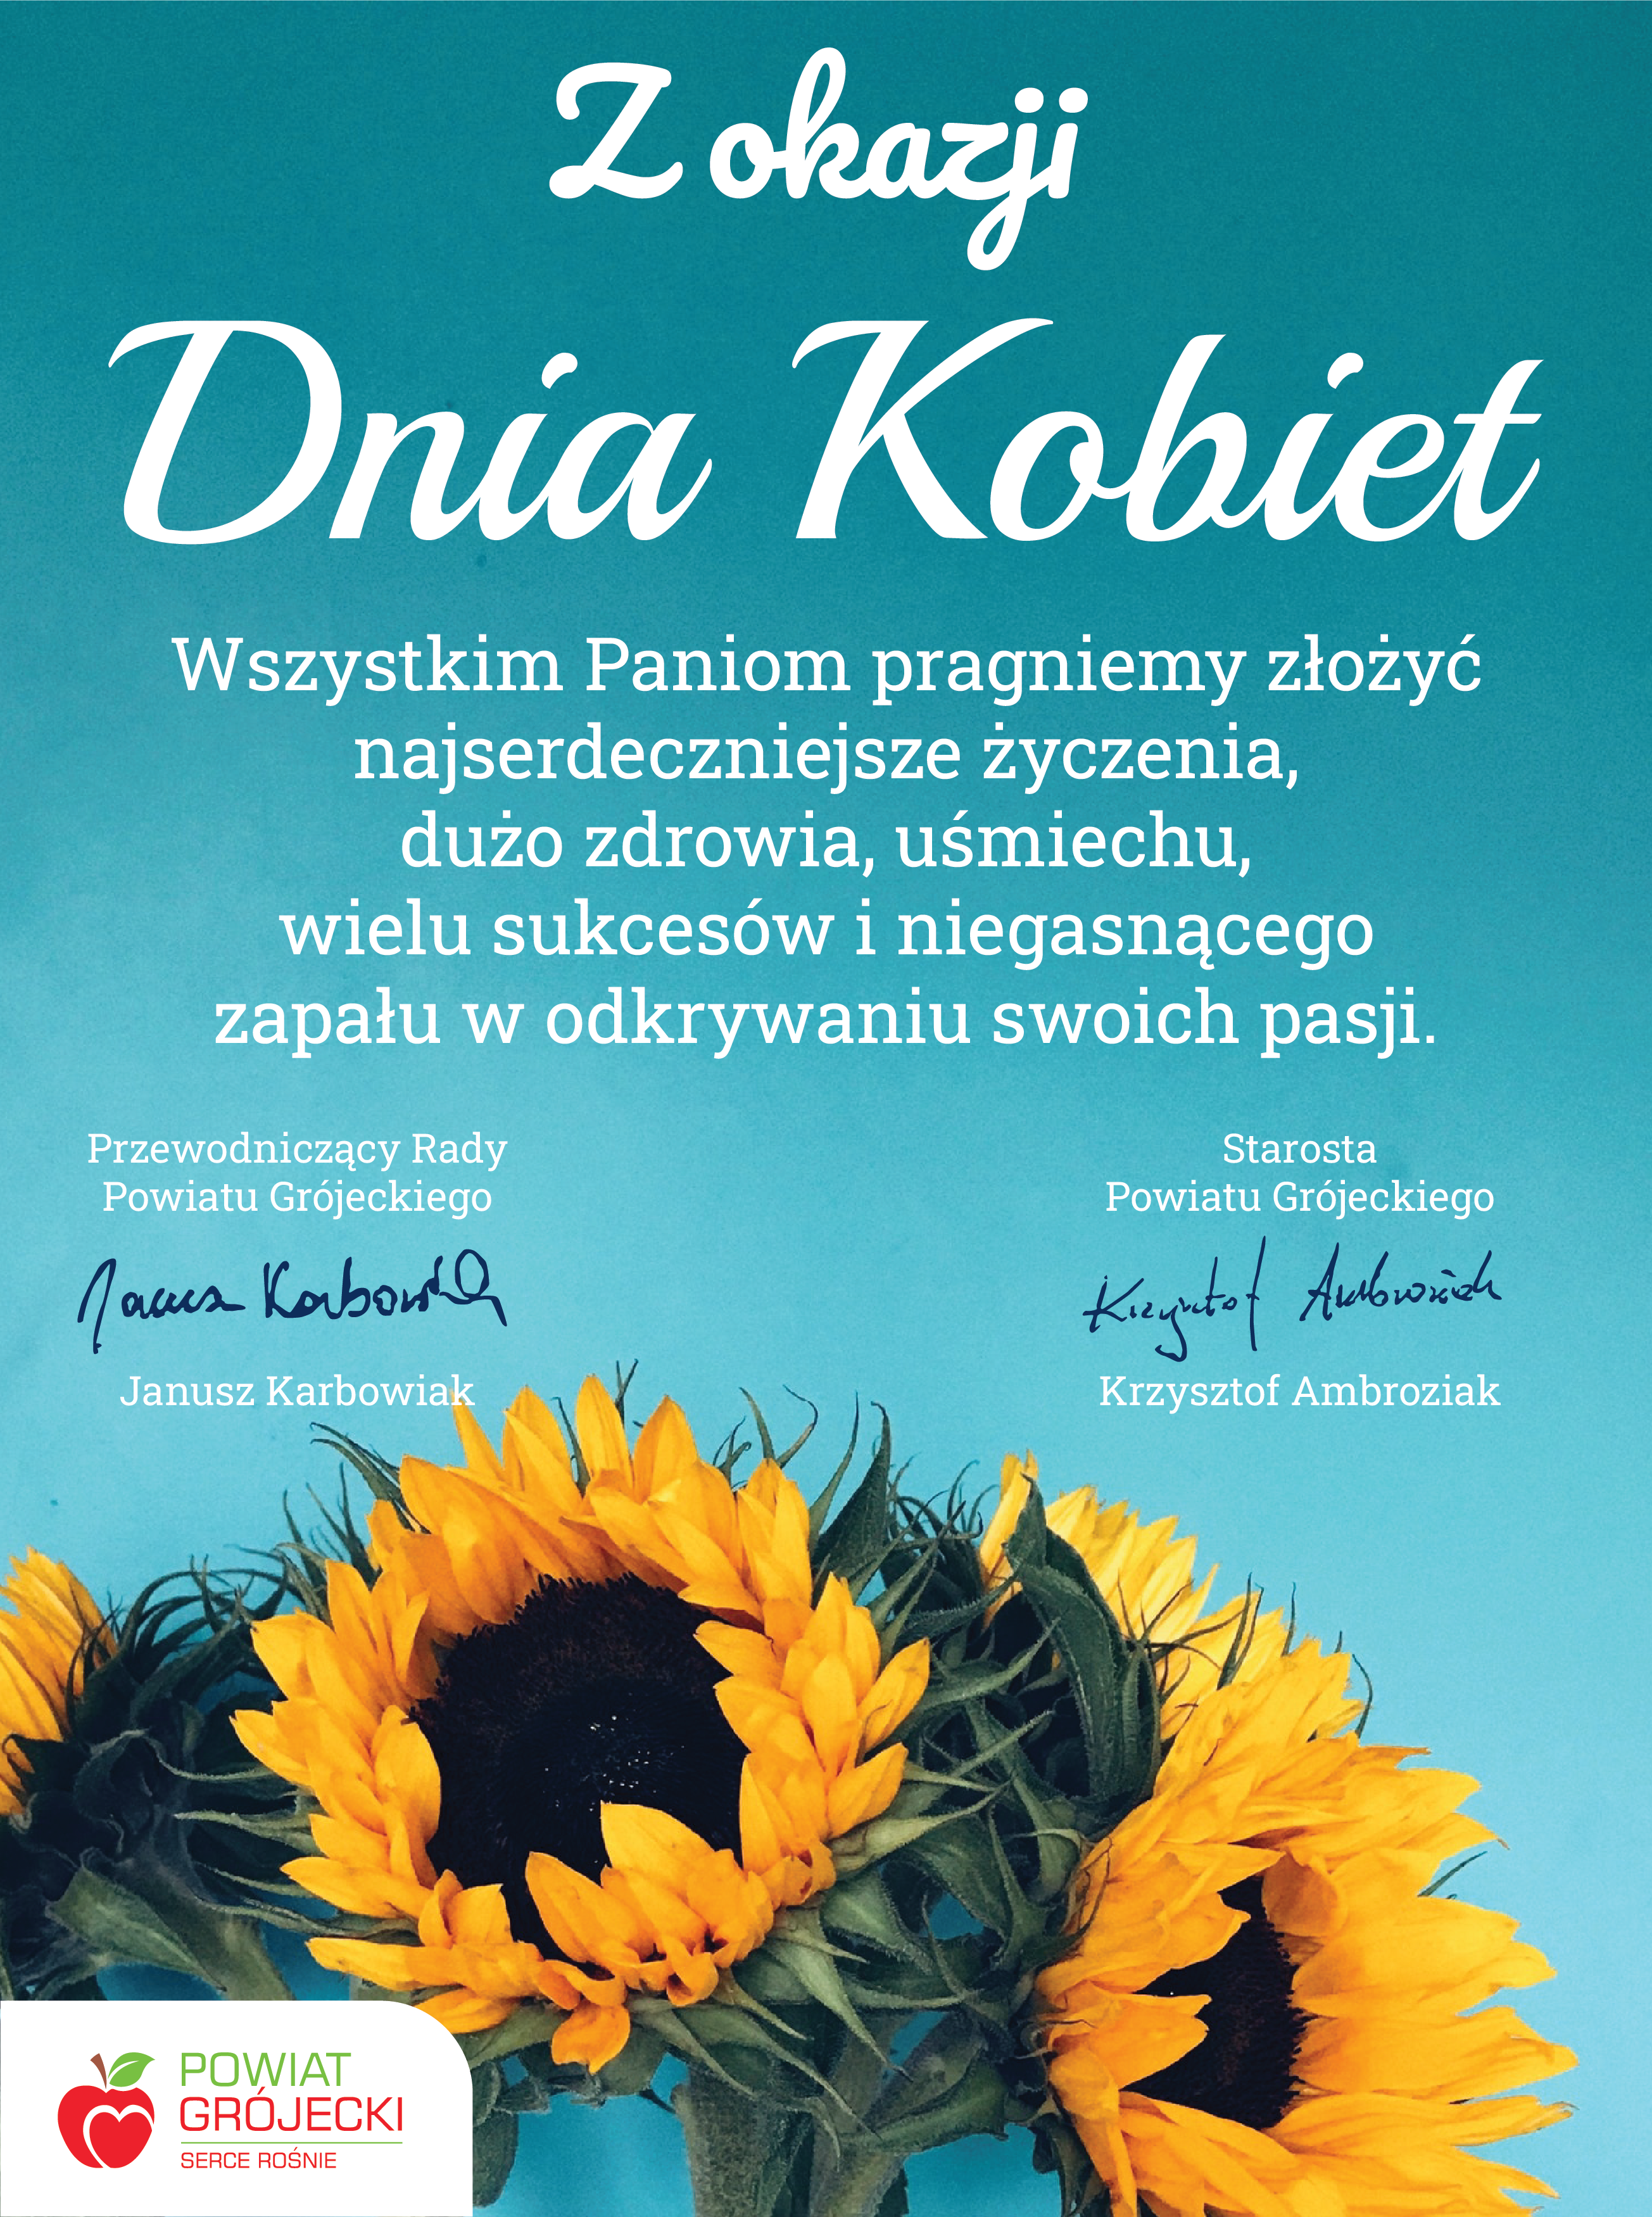 Dzien Kobiet 2022_SHARE IMAGE-04.png (5.12 MB)